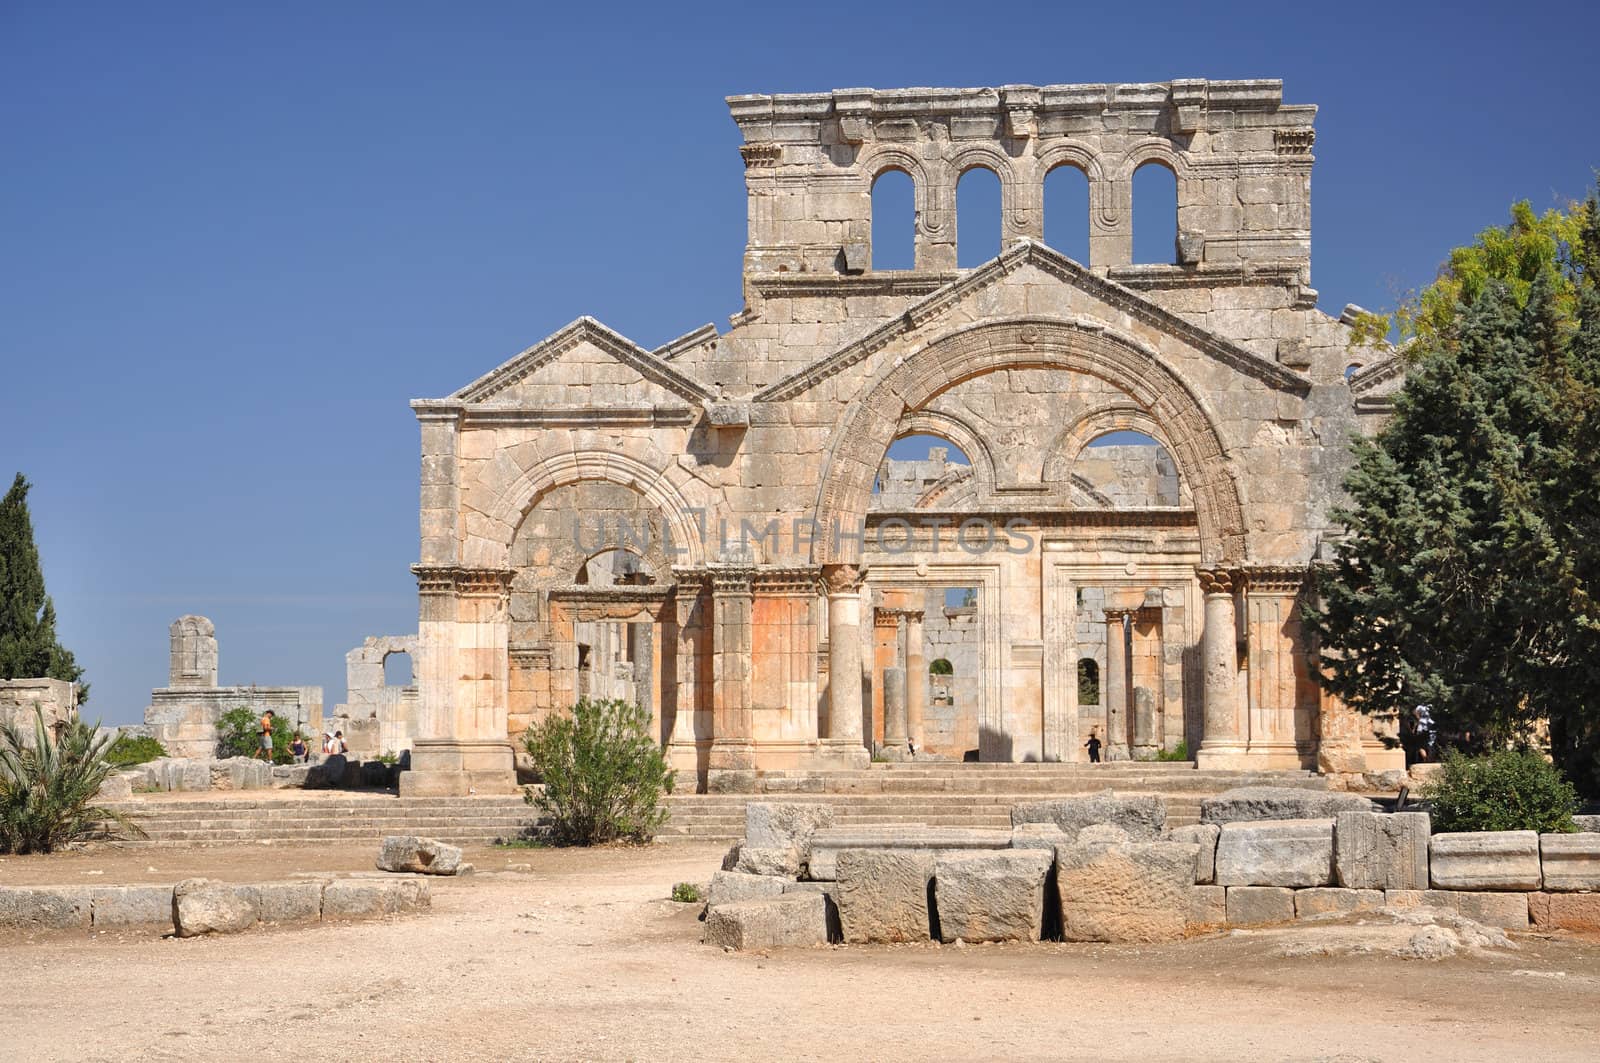 Well preserved church that dates back to the 5th century, located about 30 km northwest of Aleppo, Syria.